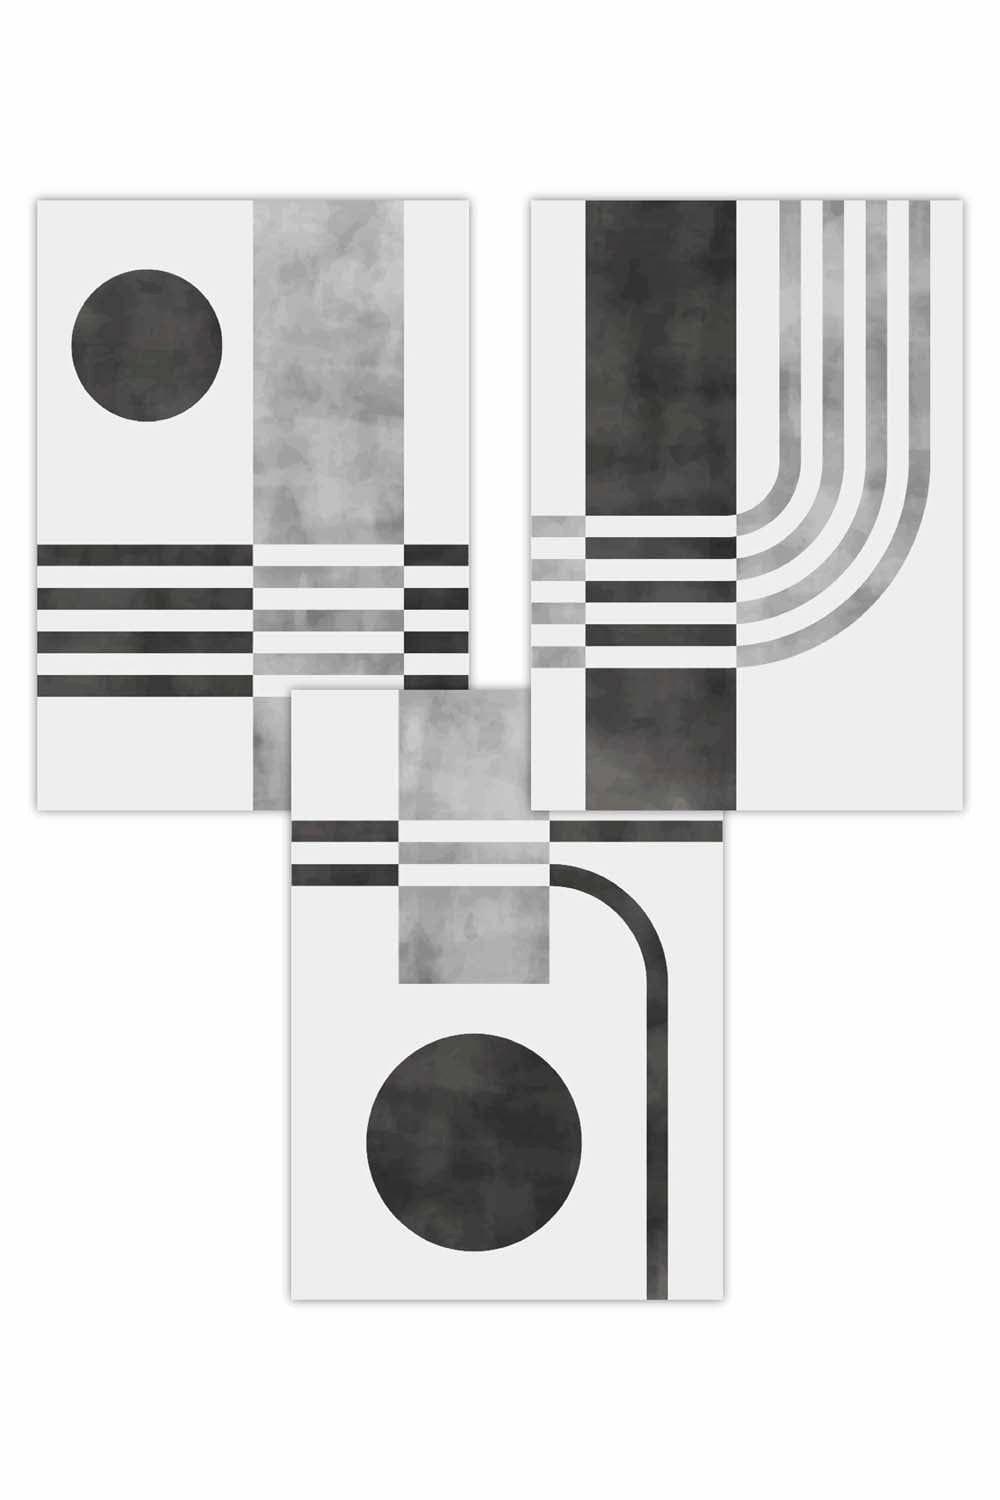 Set of 3 Mid Century Graphical Shapes in black and Grey Art Posters